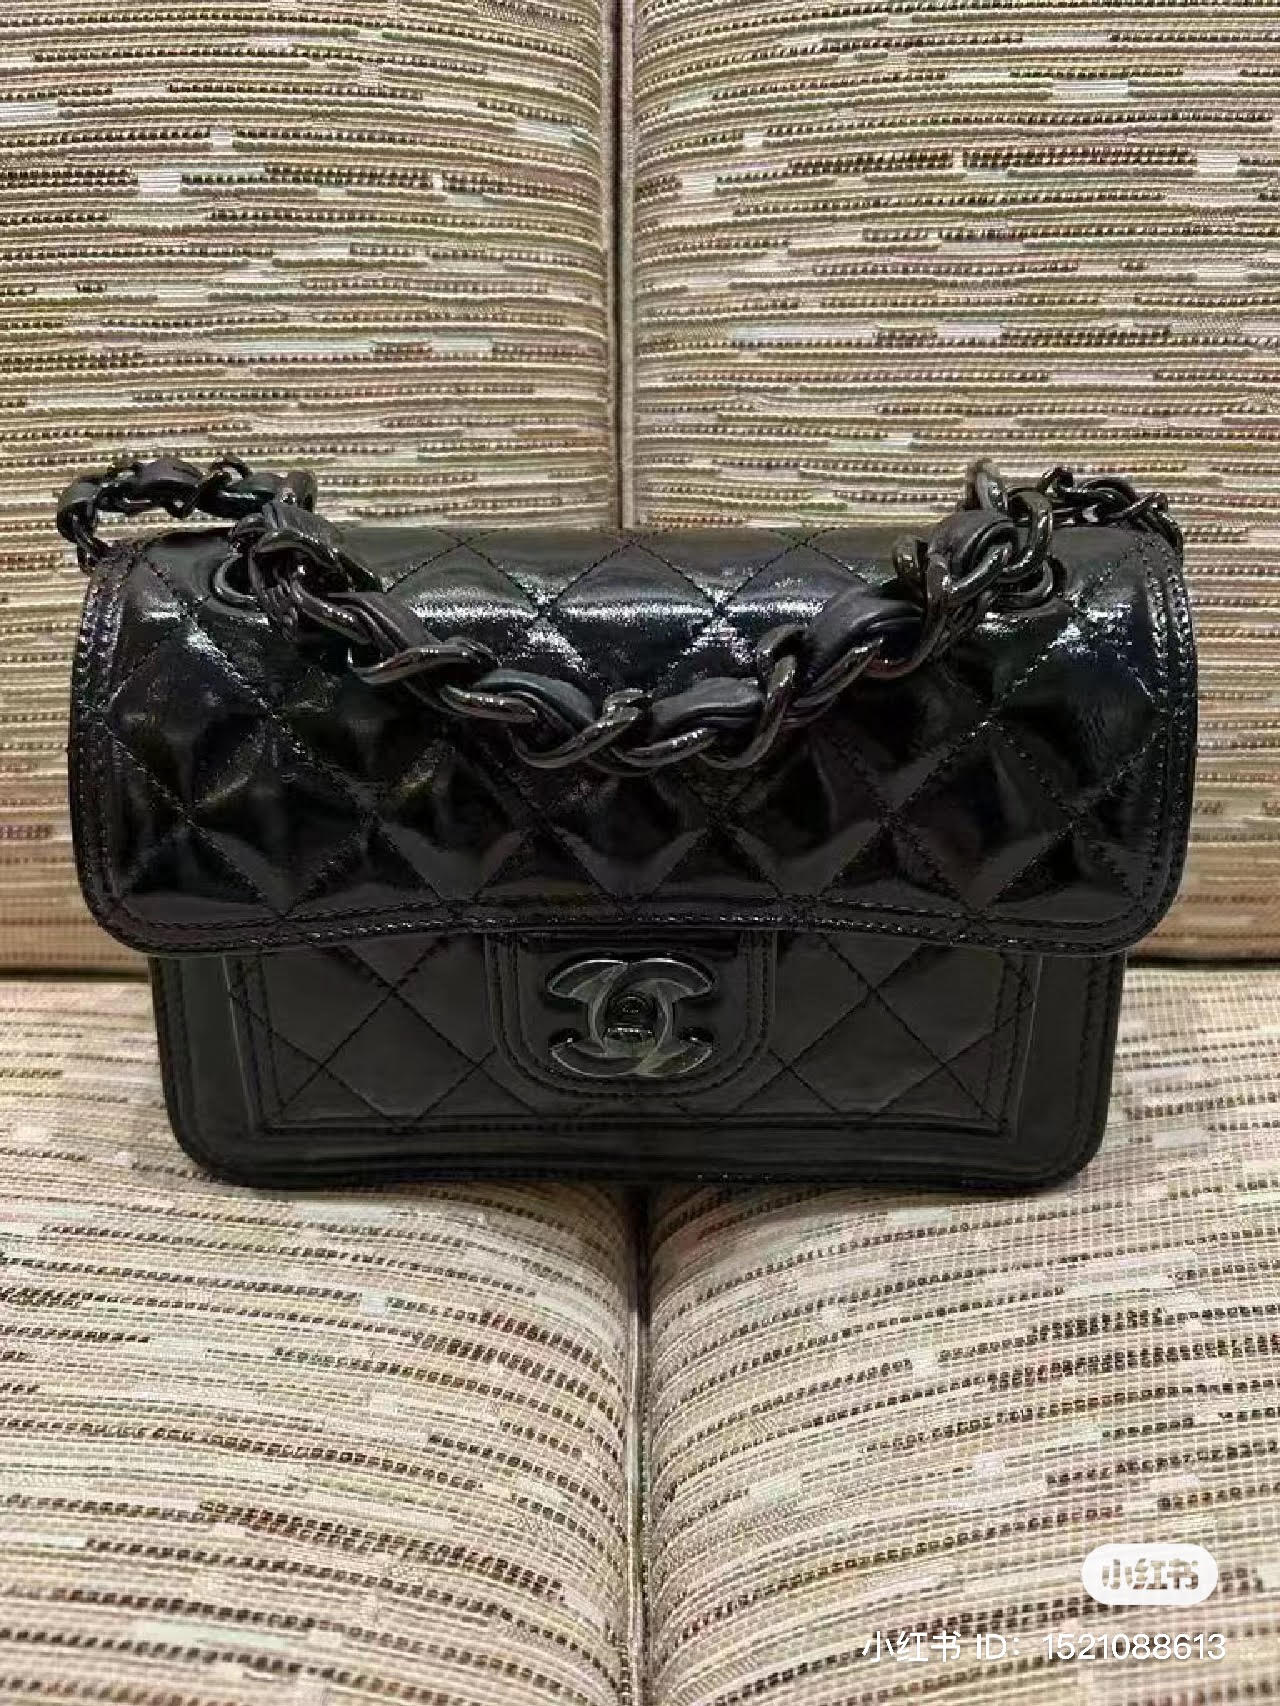 CHANEL Pre-Owned CHANEL Quilted CC Sac Class Rabat Chain Shoulder